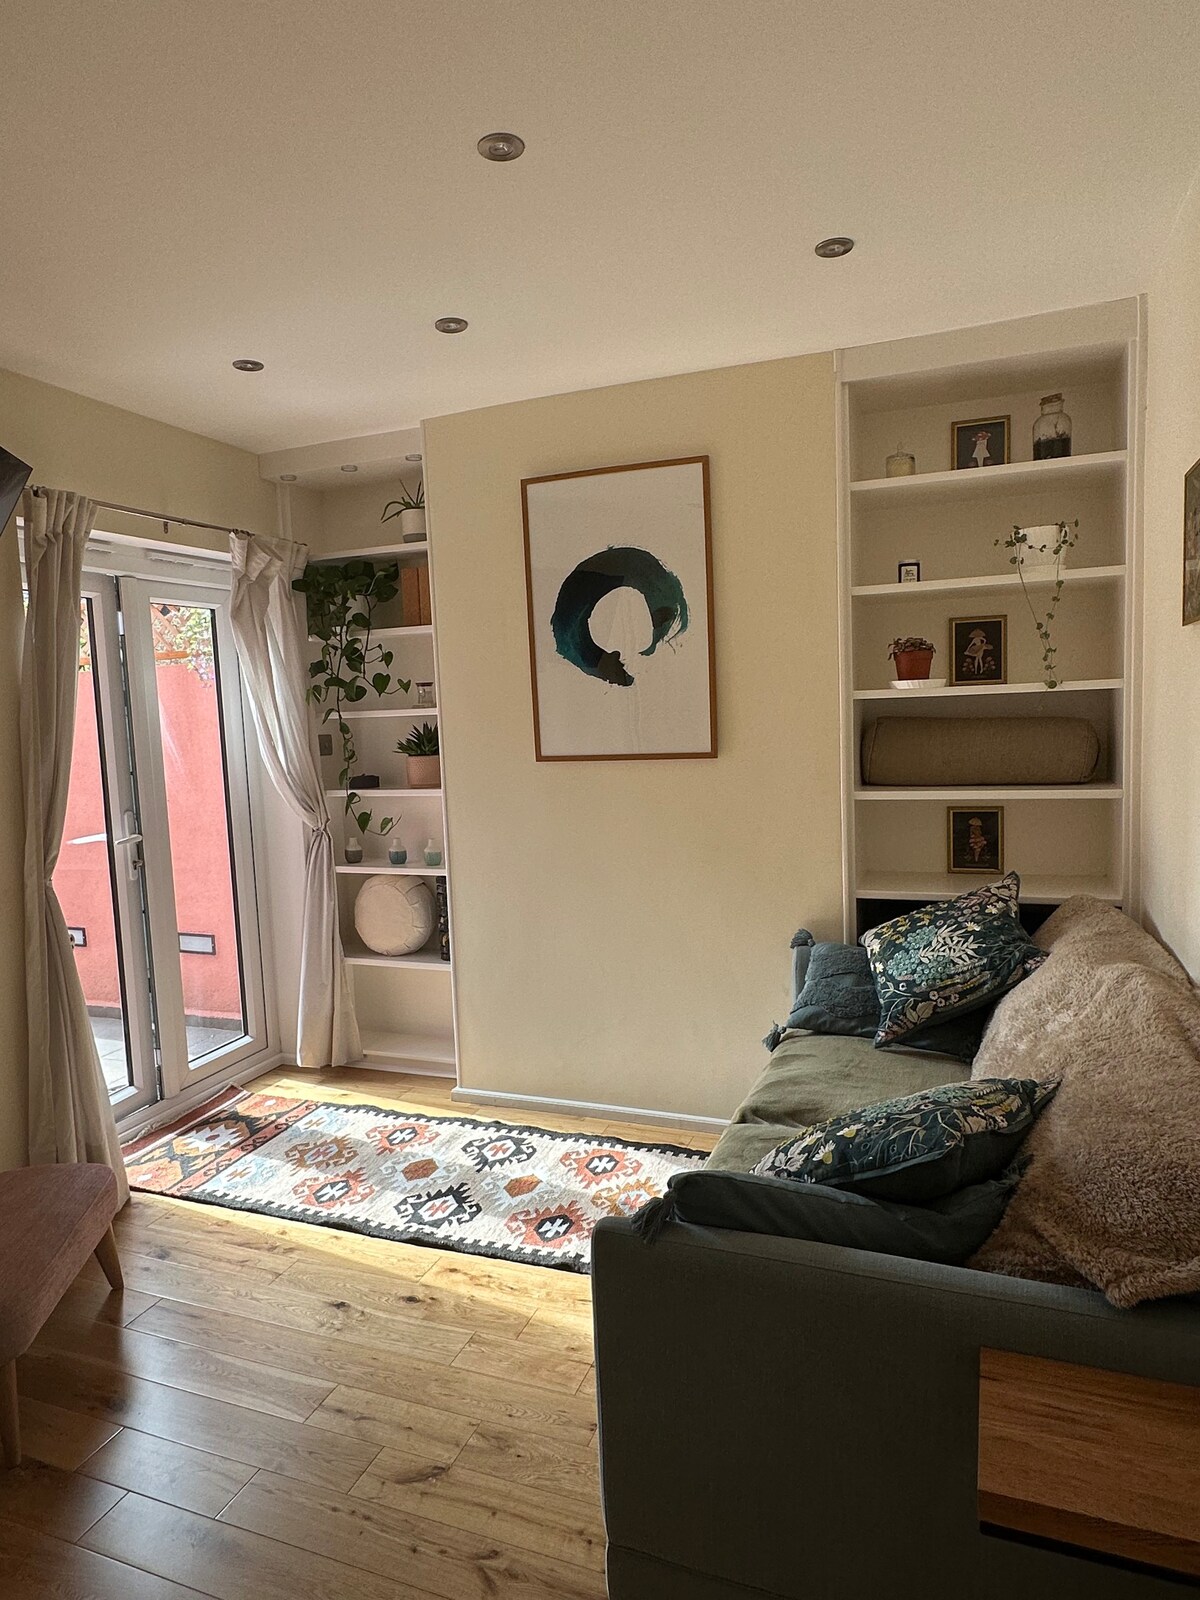 Private maisonette with garden in Wimbledon